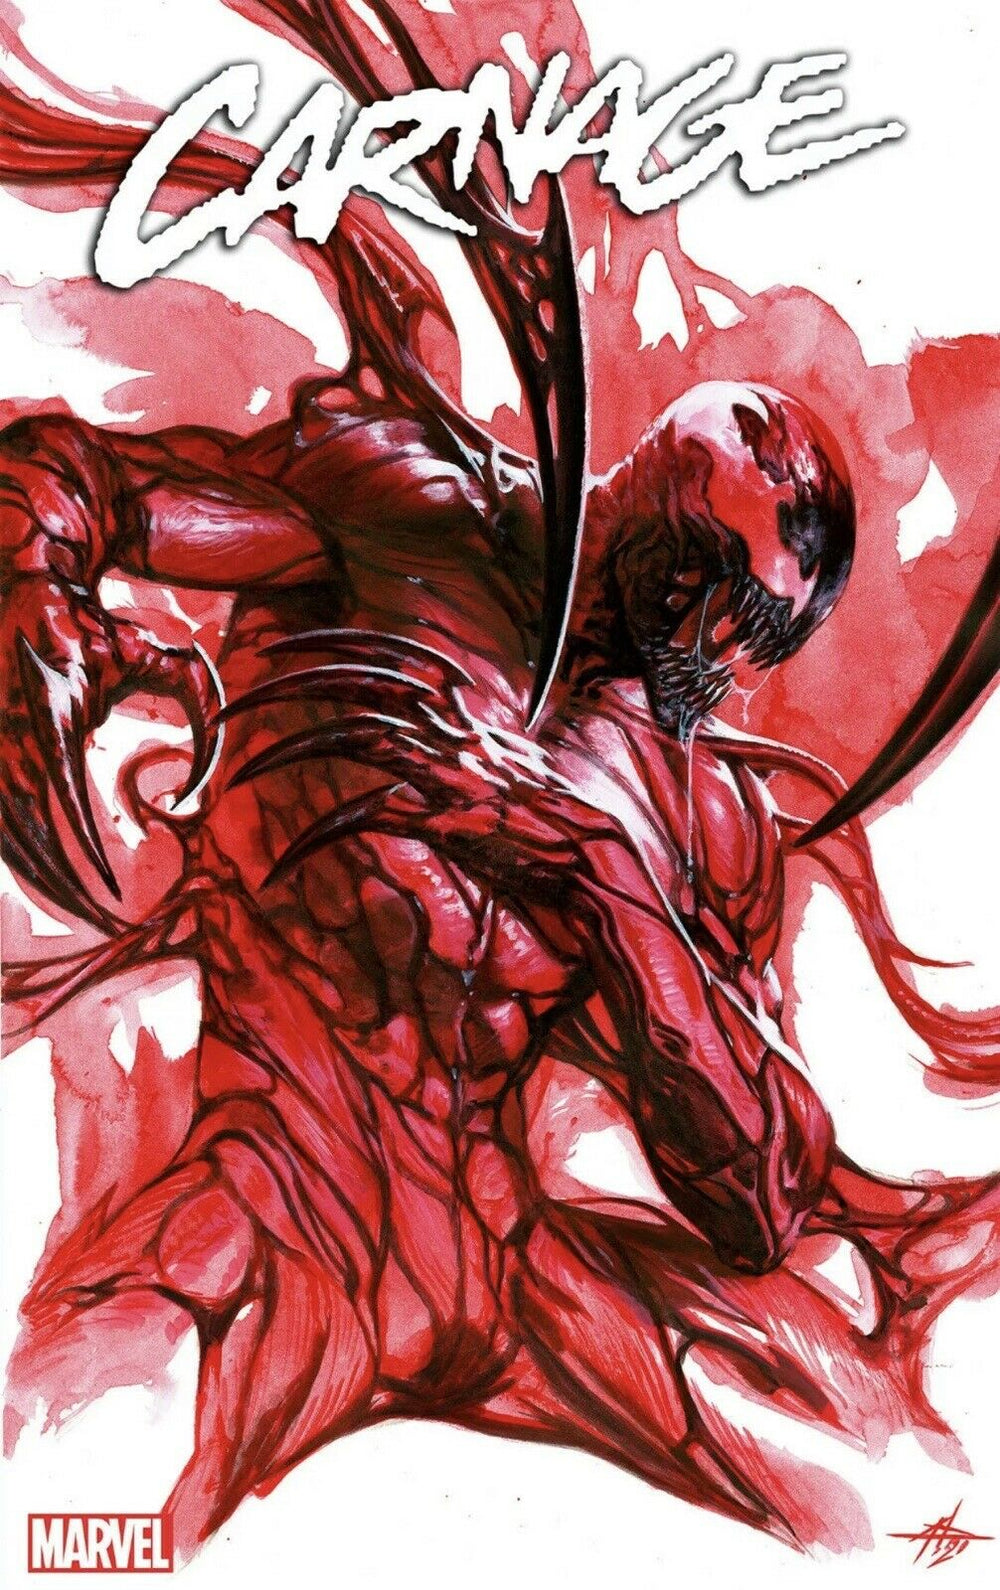 CARNAGE #2 GABRIELE DELL’OTTO Variant